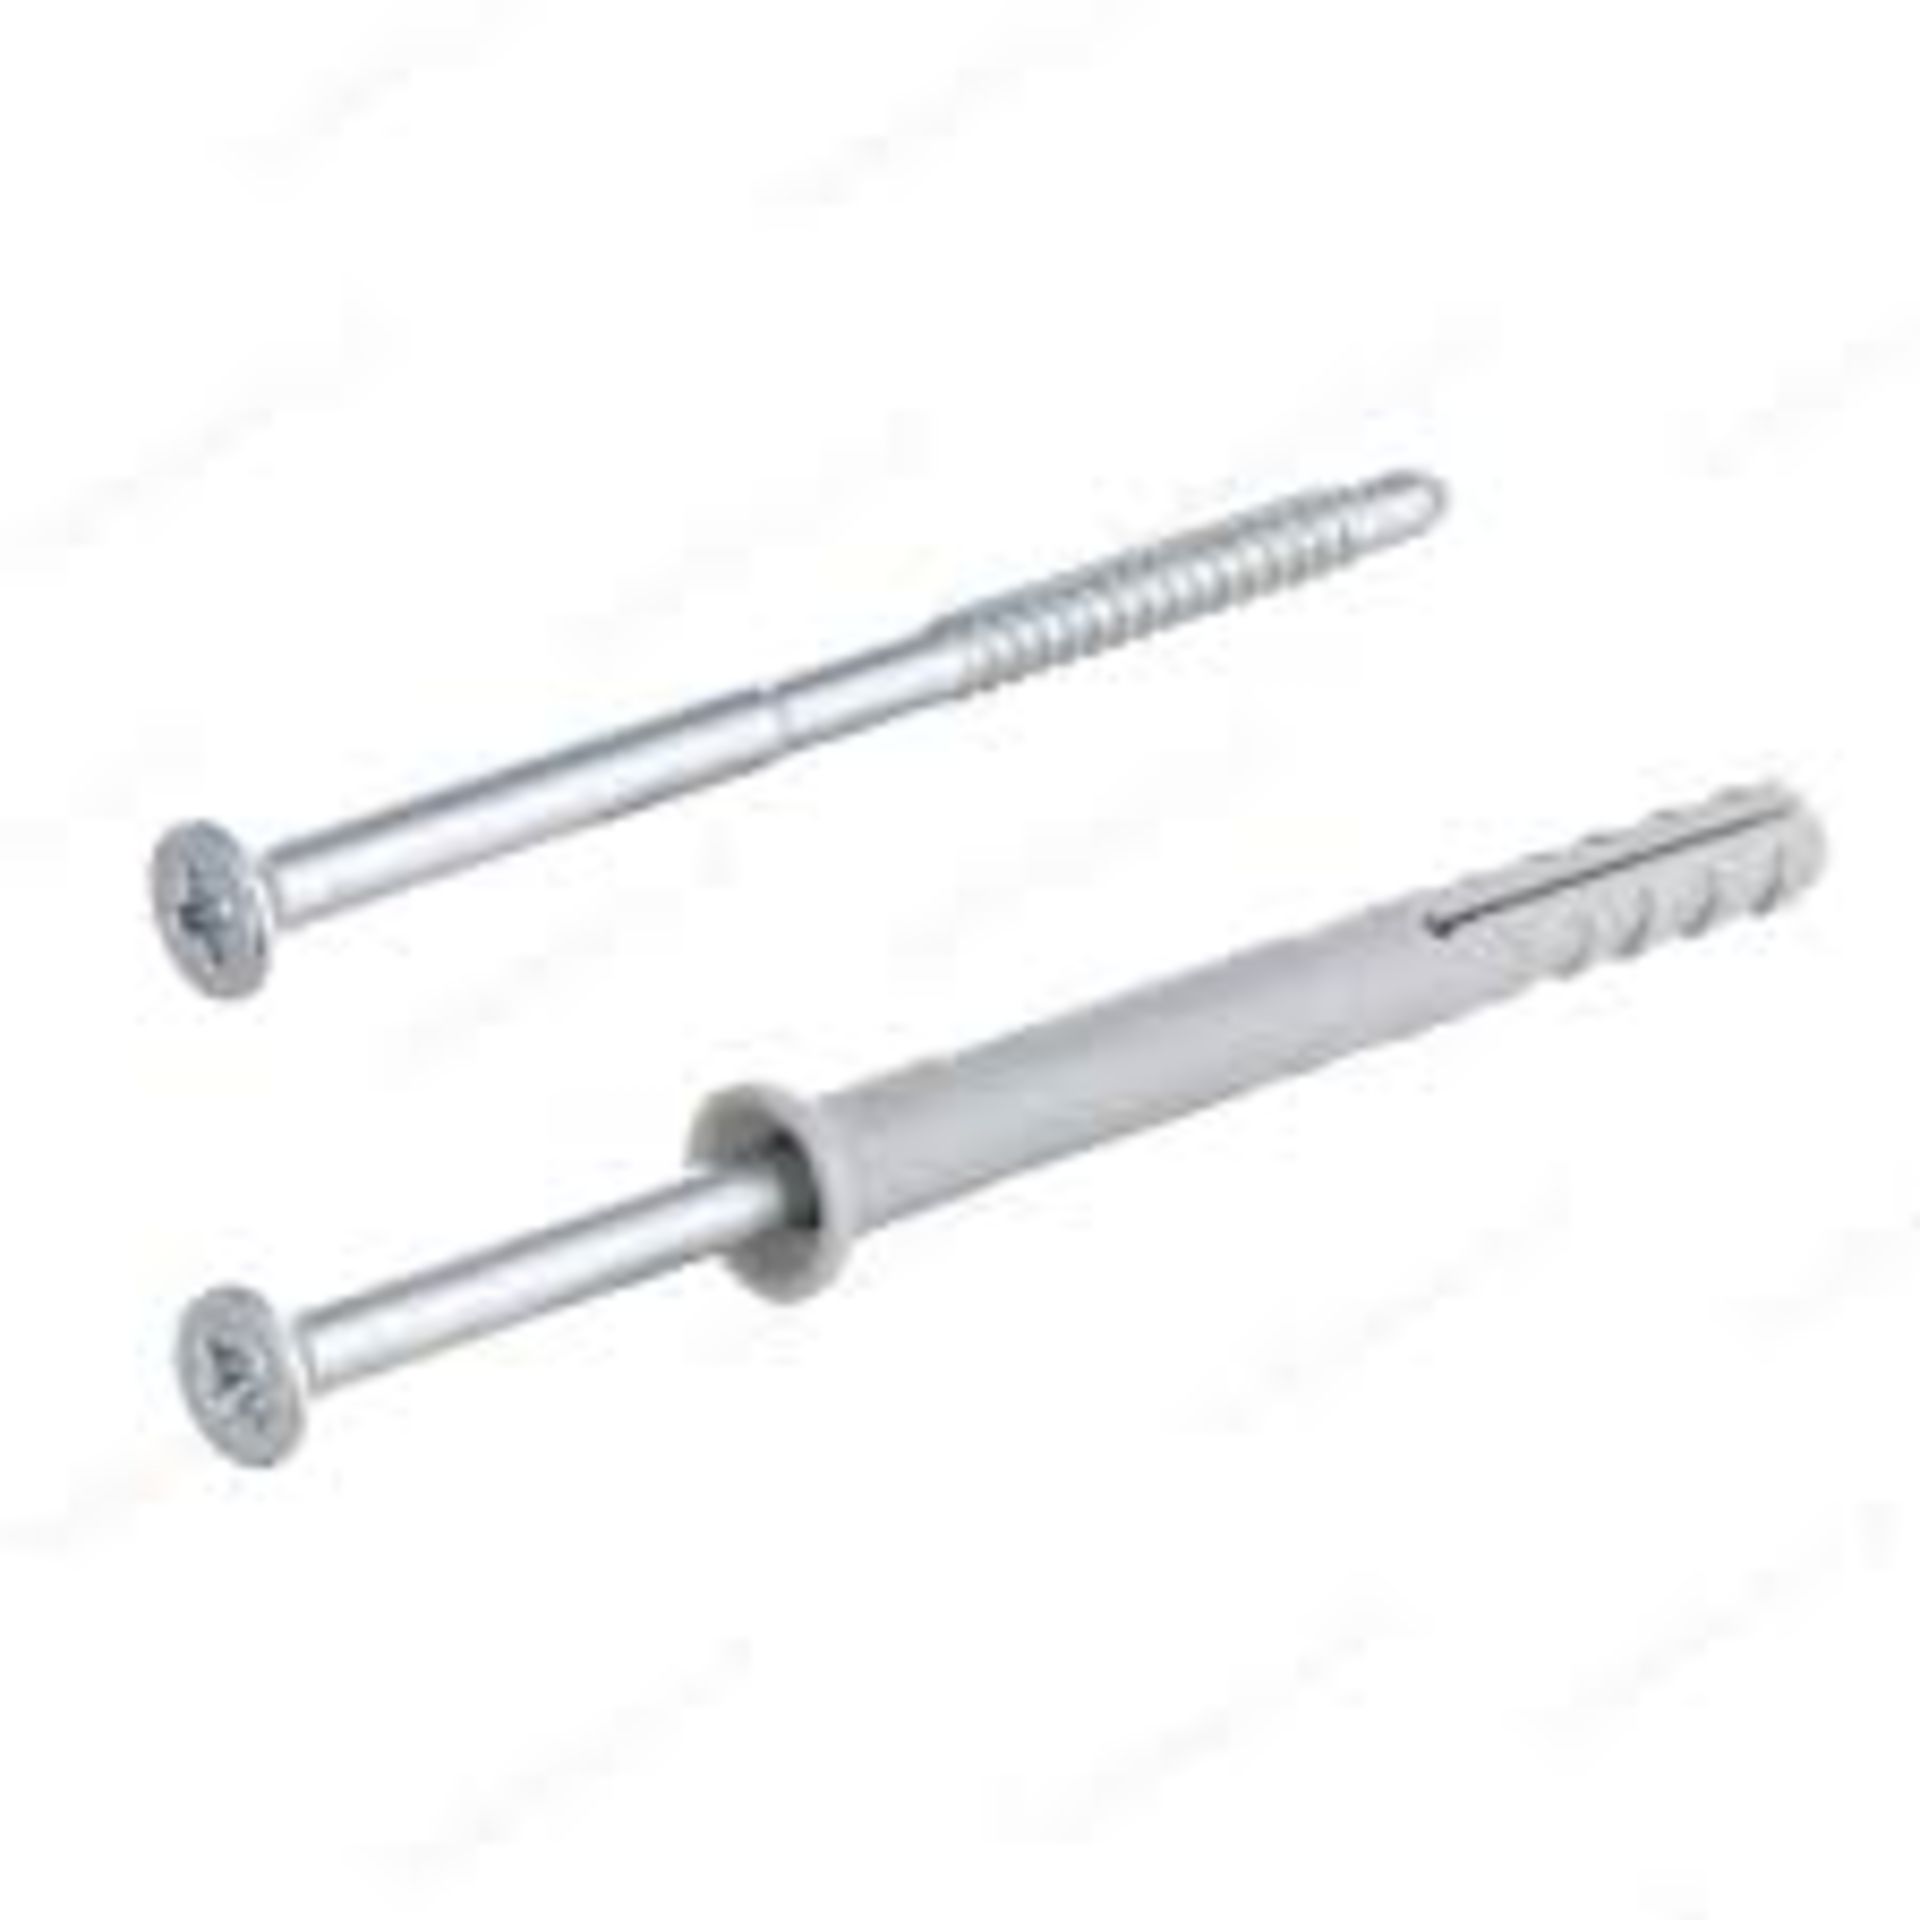 V Grade A Two Fischer fixings 8 mm x 120 mm 20 per pack hammer in fixings